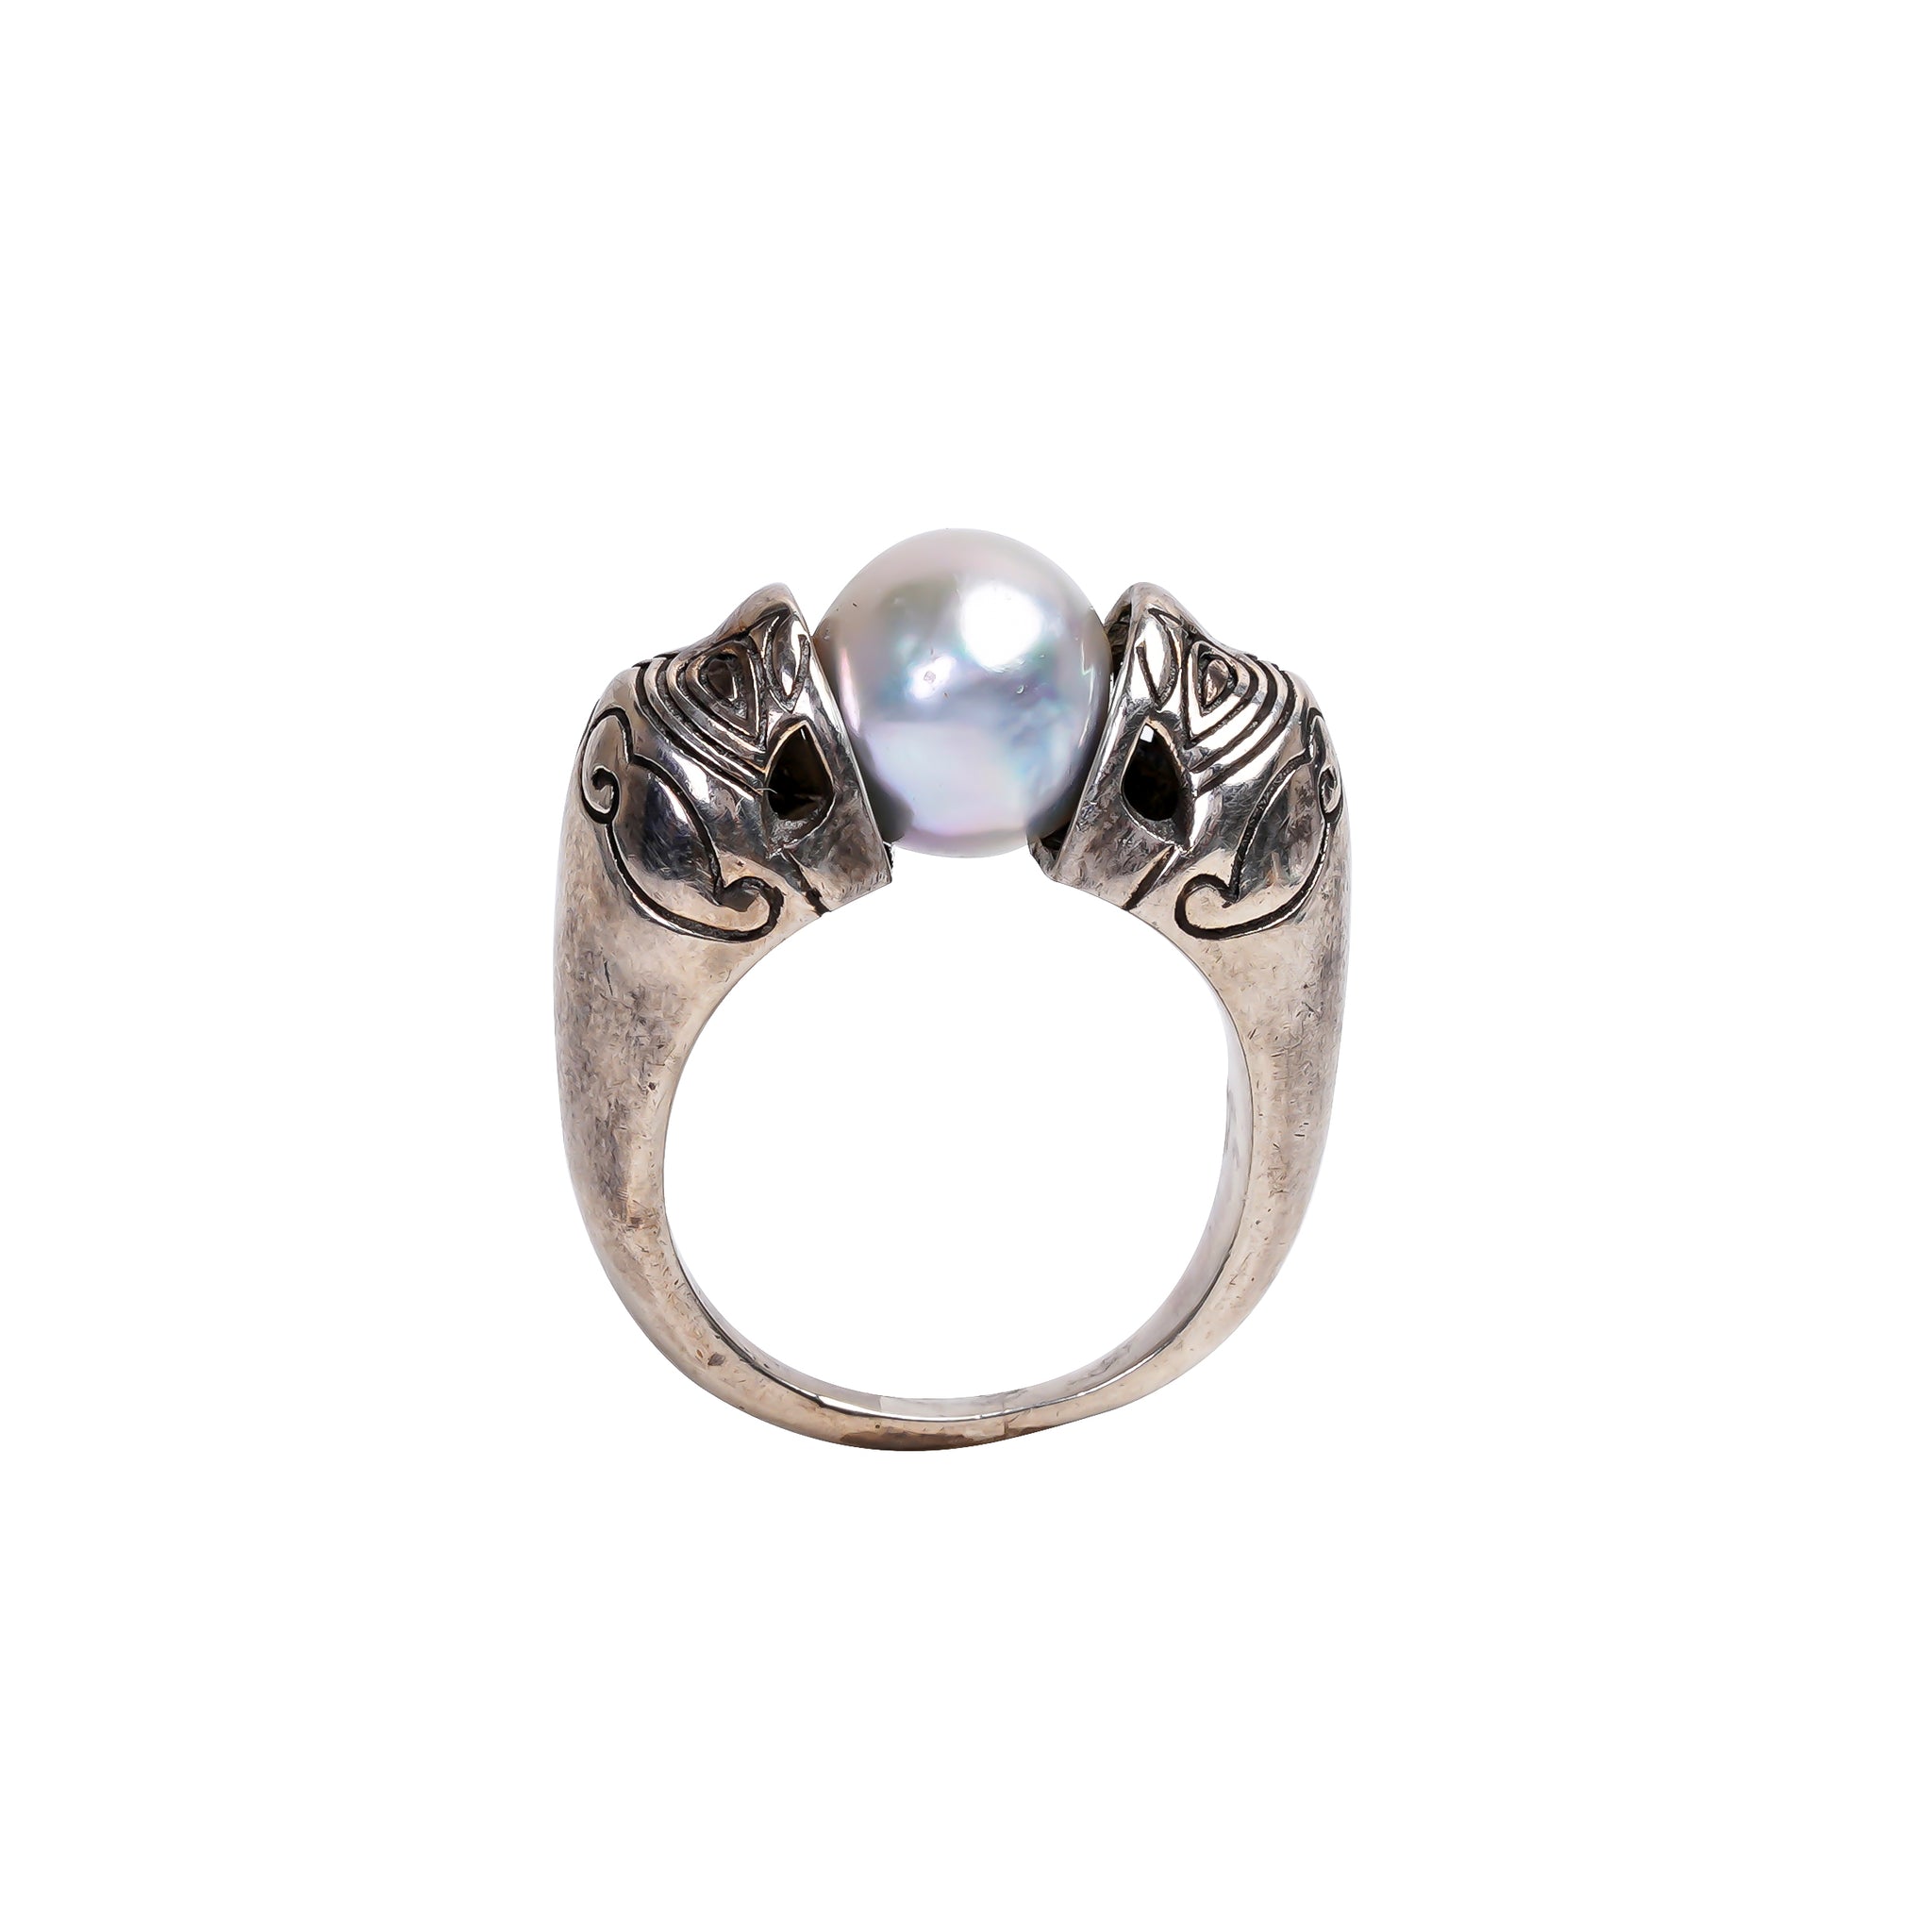 White Gold Plated Cultured Pearl Ring - Budding Beauty | NOVICA